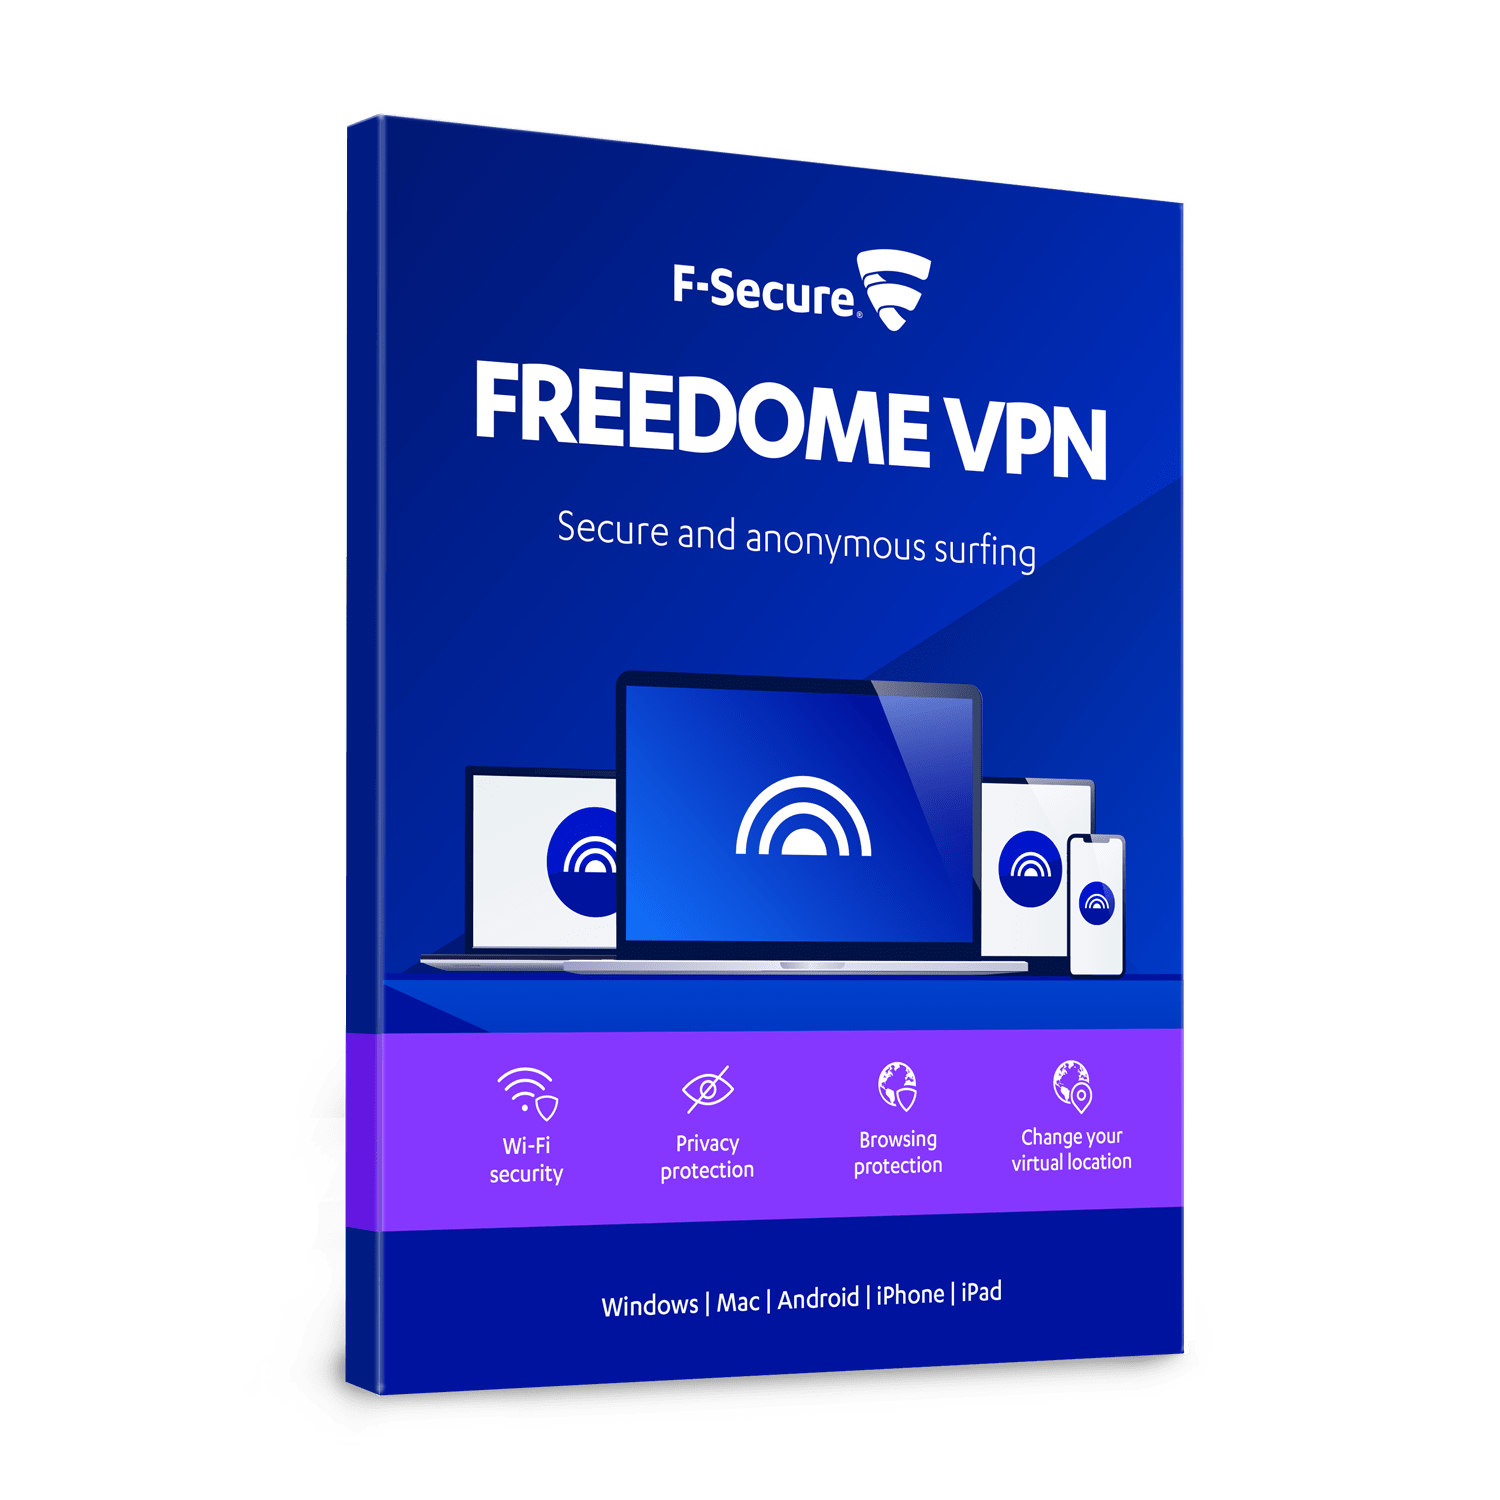 review free vpn for mac